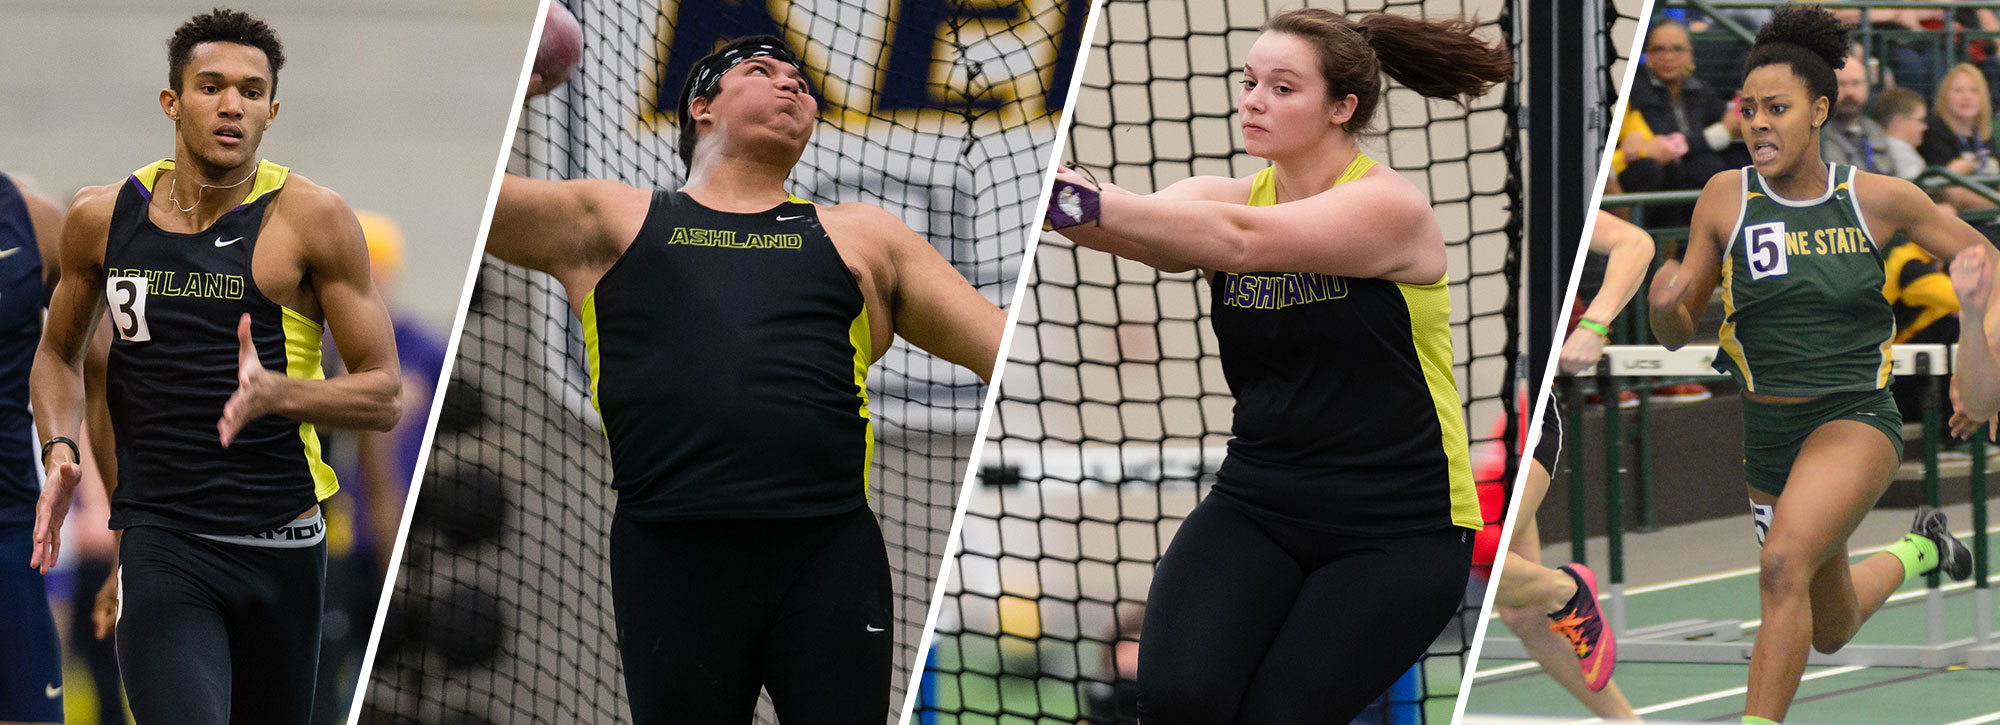 Trio of Eagles, Wayne State's Seals Collect Indoor Track & Field Weekly Honors